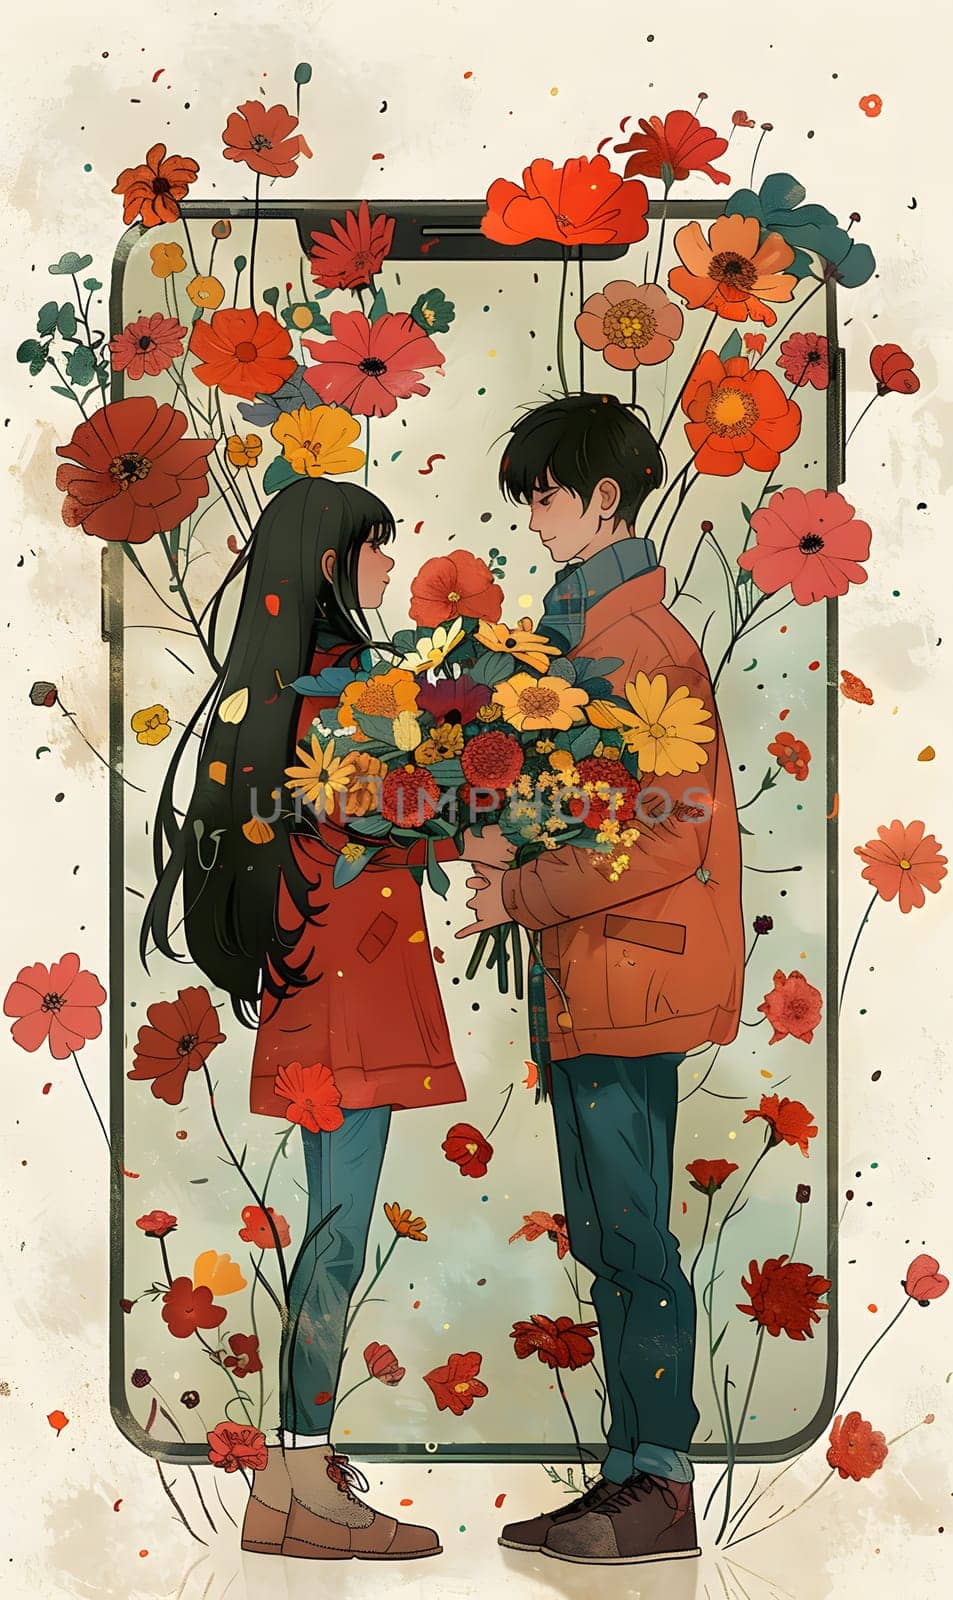 A boy and a girl are standing together with a cell phone surrounded by flowers. The colorful petals add a vibrant touch to the creative arts scene